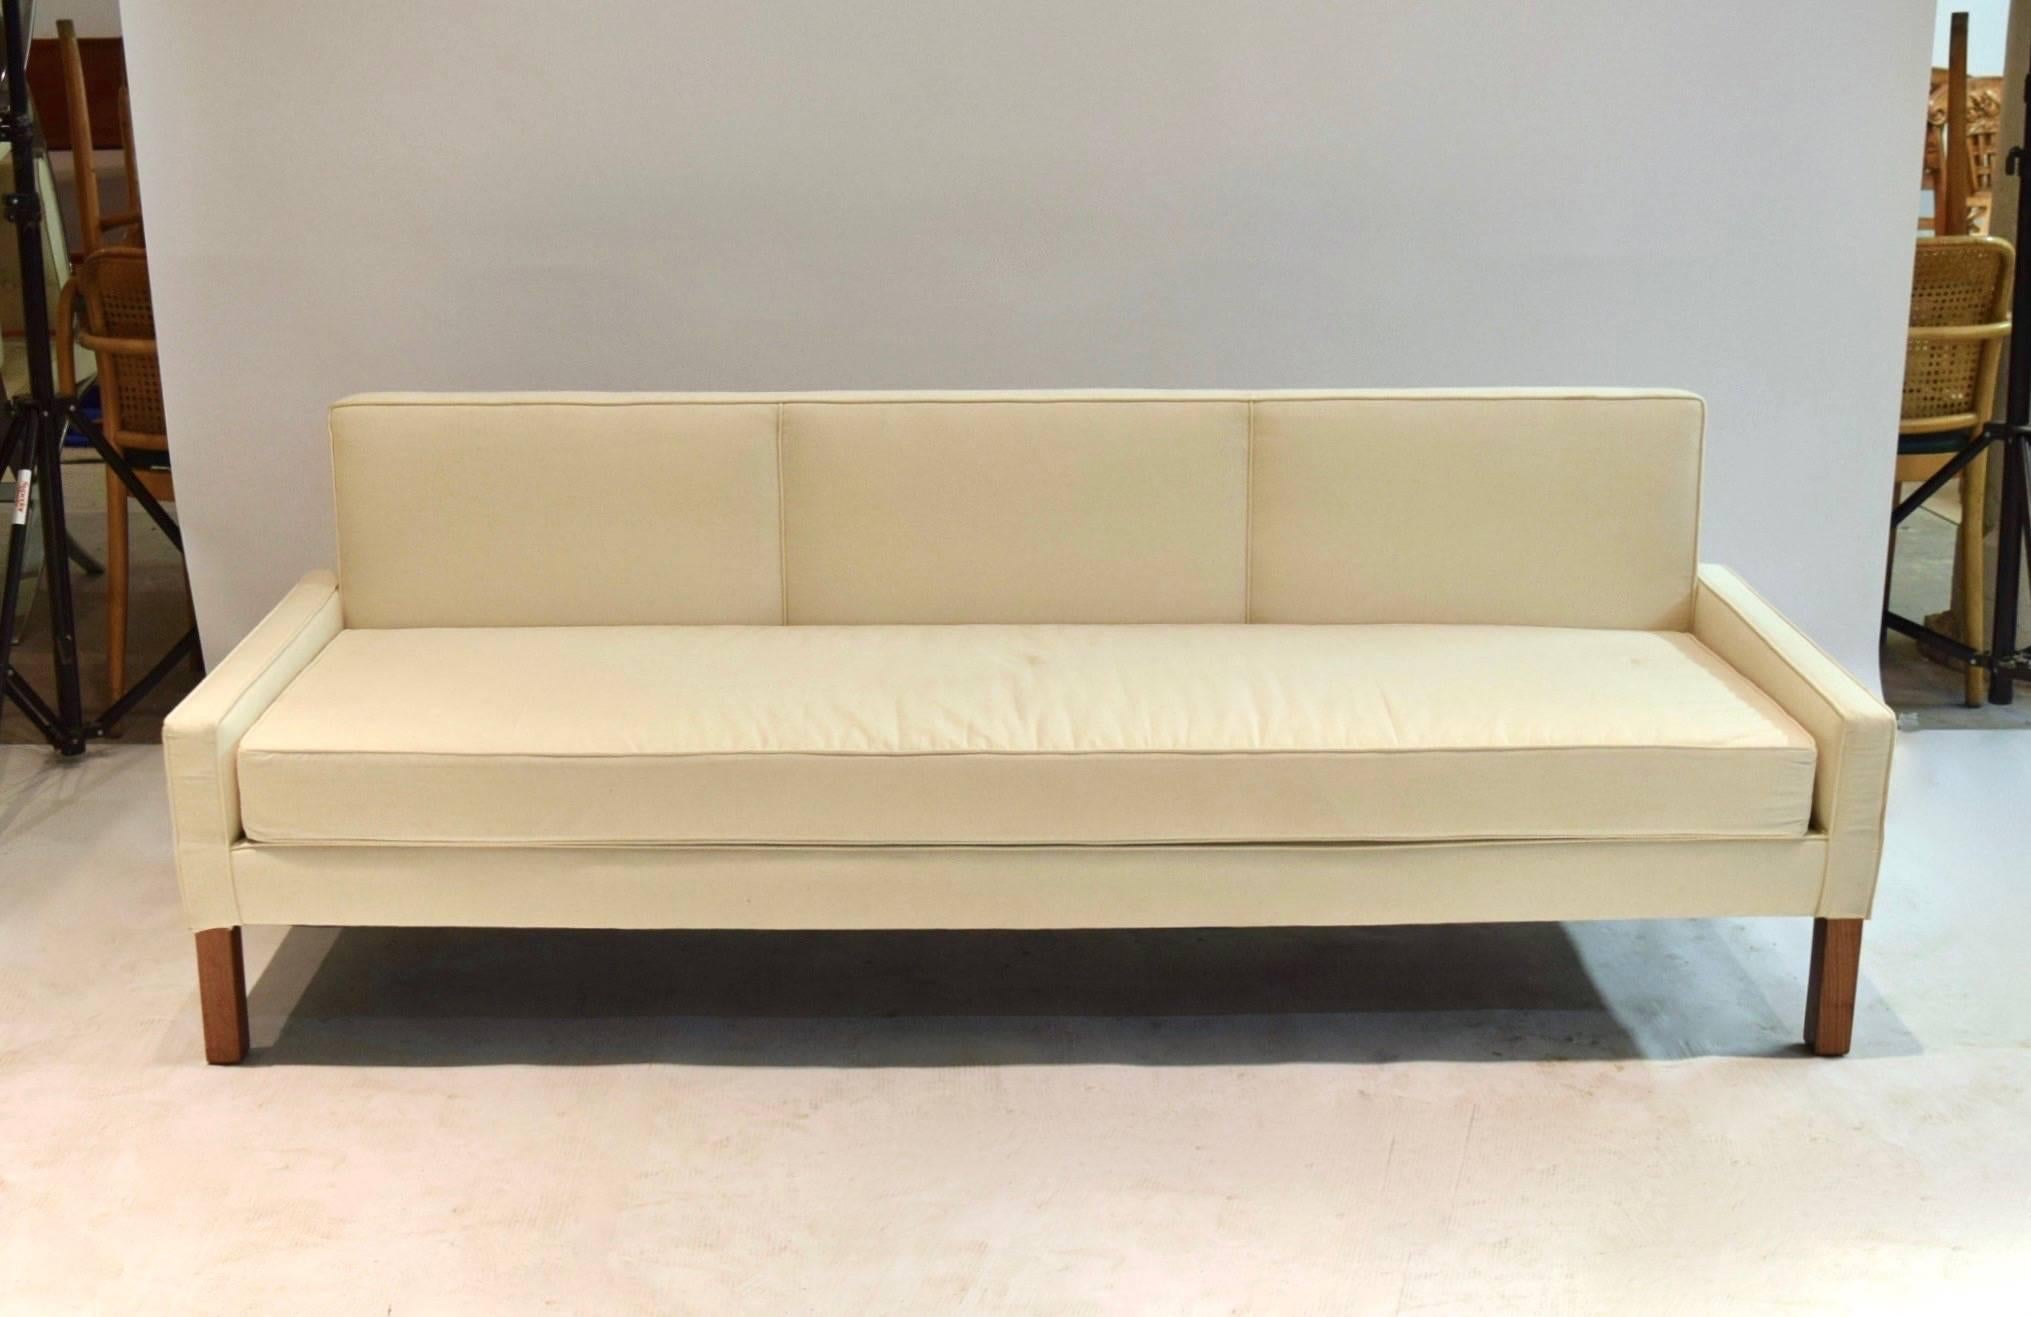 Early three-seat Widdicomb sofa in excellent condition, recently reupholstered in muslin and supported on four restored wooden legs.
Measure: Arm height 17 inches.